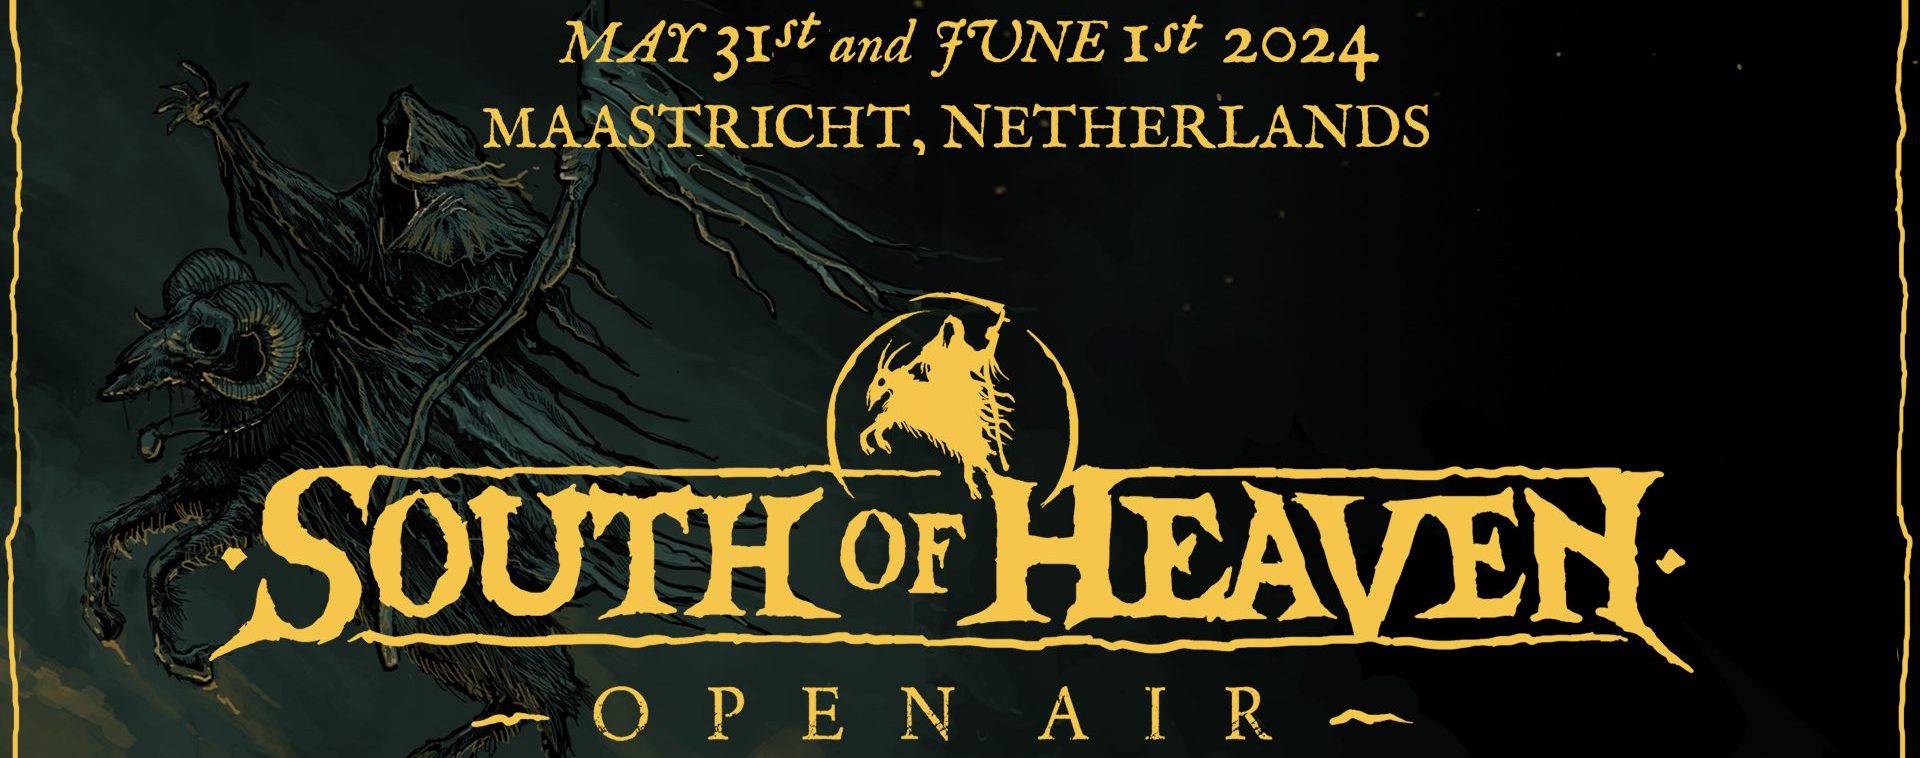 South of Heaven open air 2024